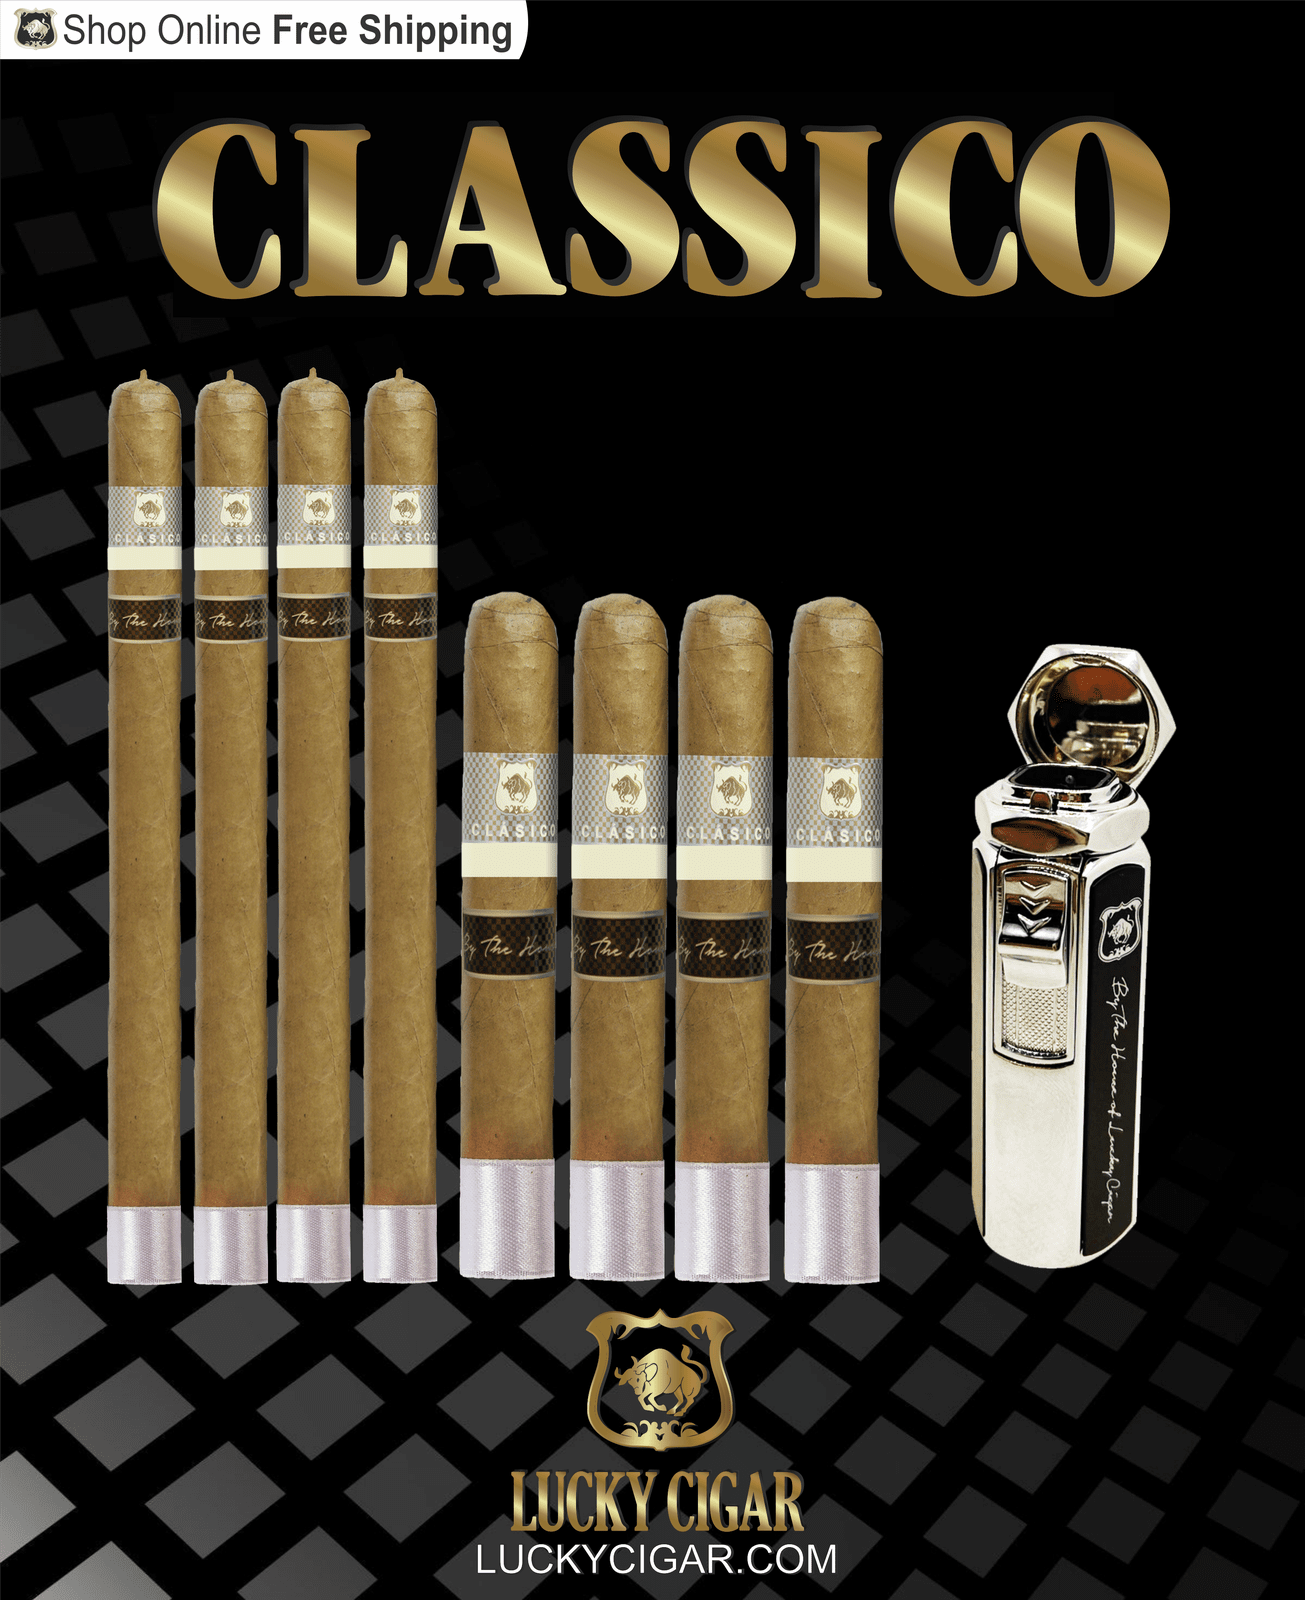 Lucky Cigar Sampler Sets: Set of 8 Classico Cigars, Robusto, Lancero with Torch